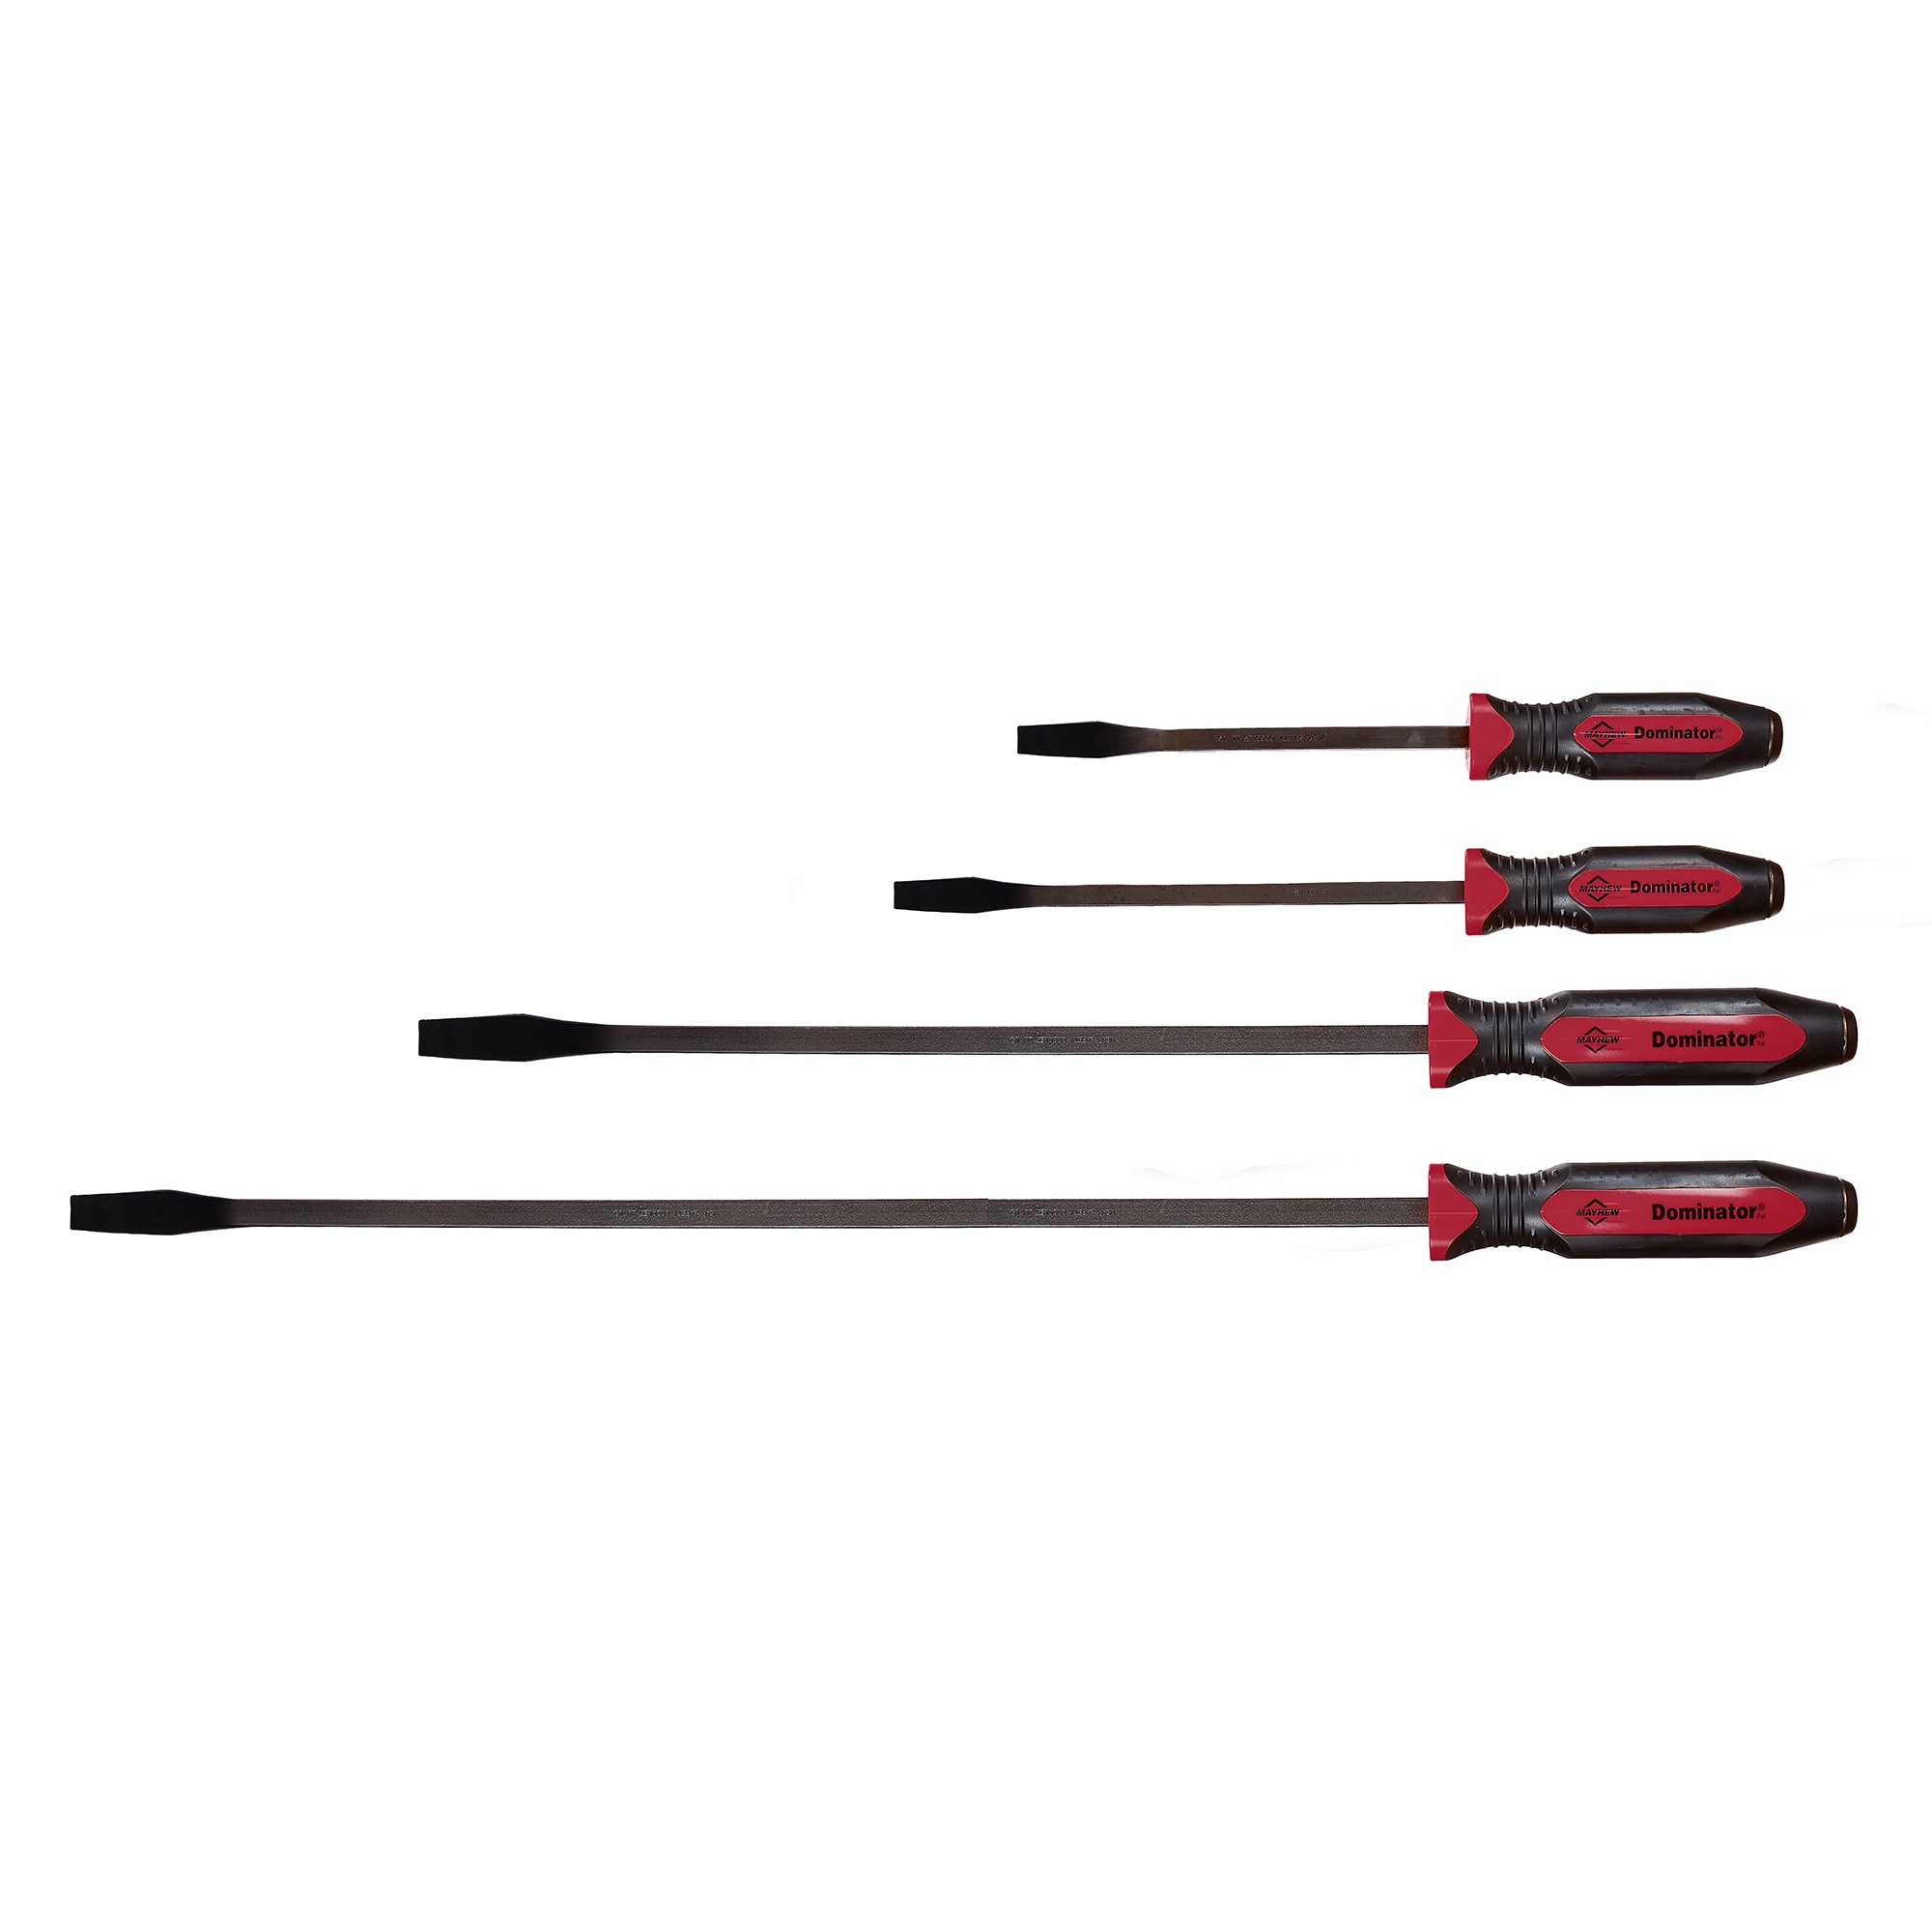 Mayhew Tools MAY-14064 Red Dominator Straight Pry Bar Set - 4 Piece